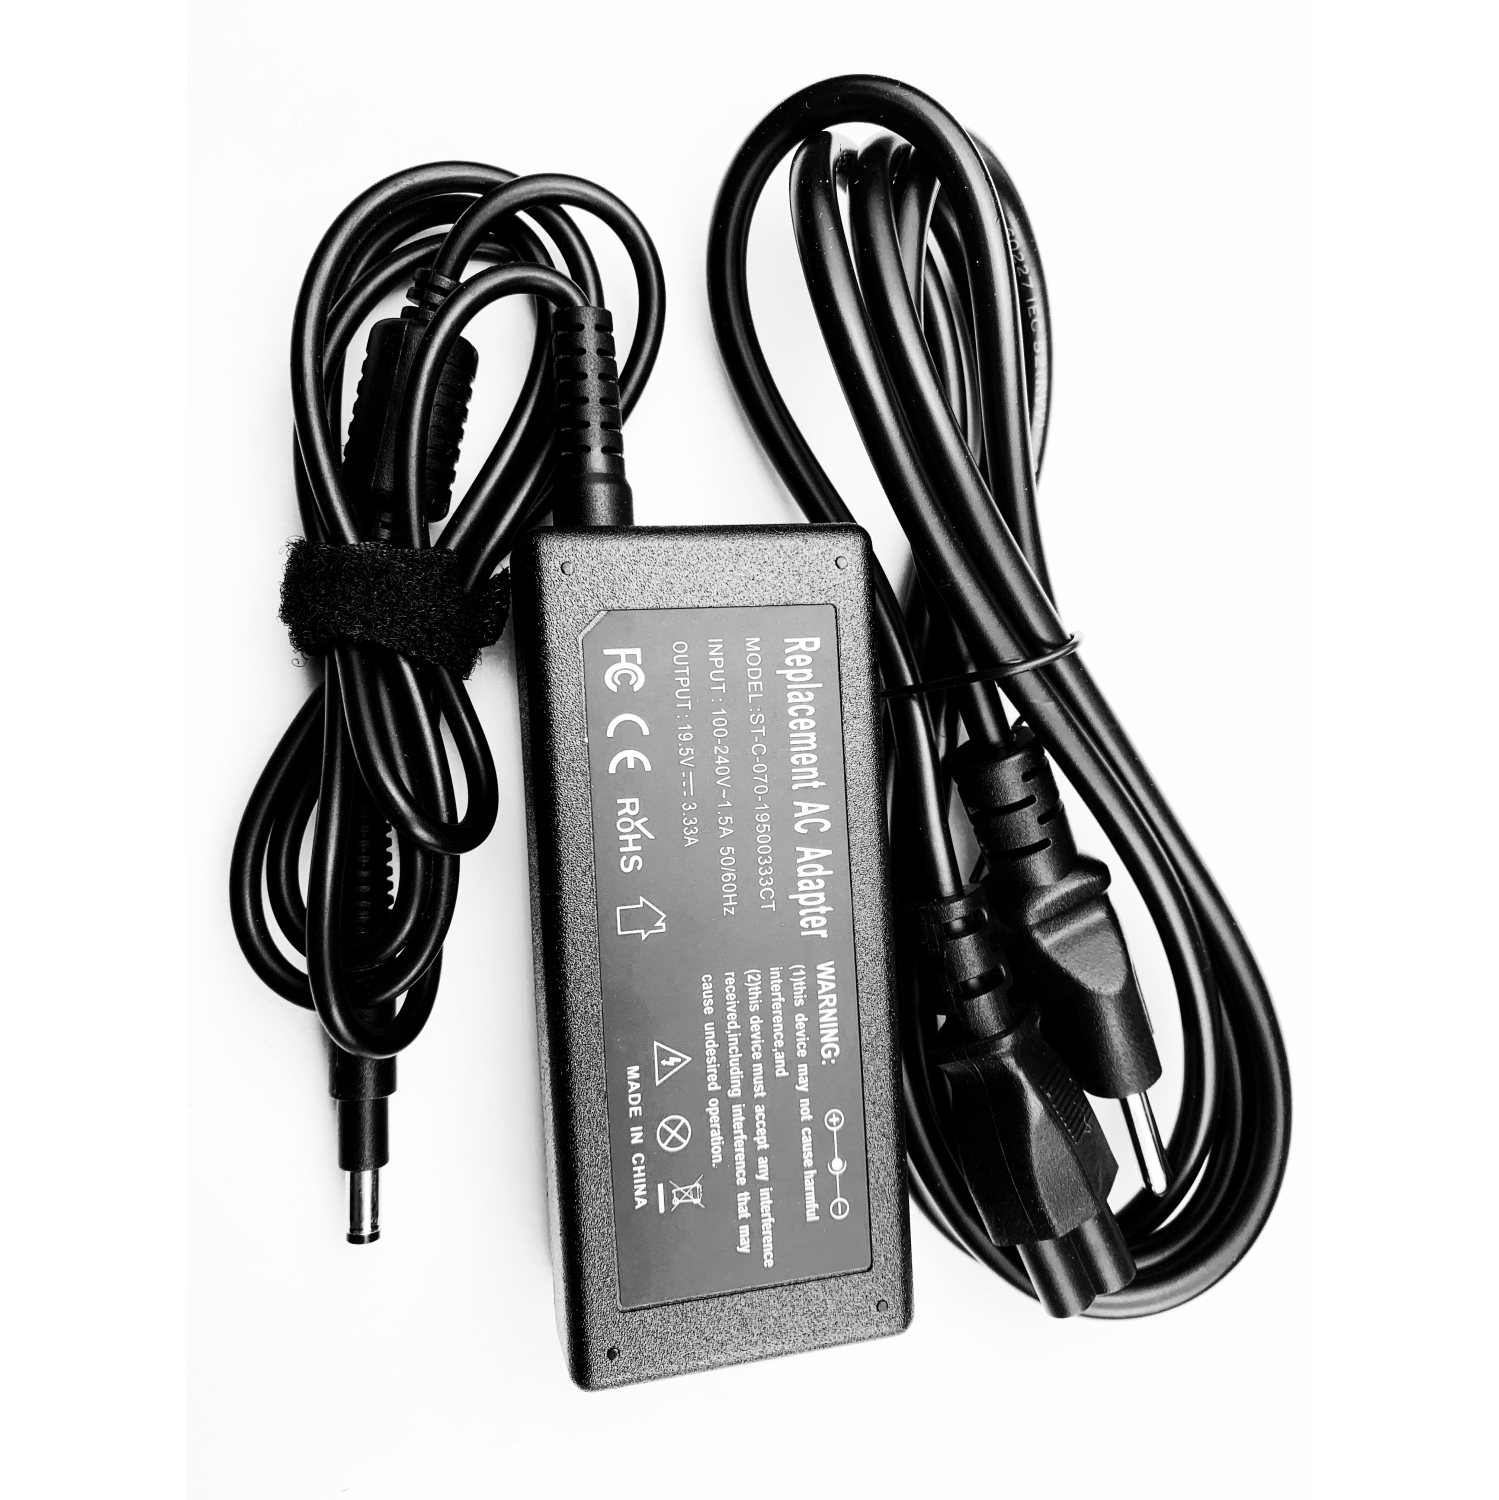 19.5V 65W 4.75mm x 1.7mm new AC adapter power cord charger for HP Envy 15-b140us